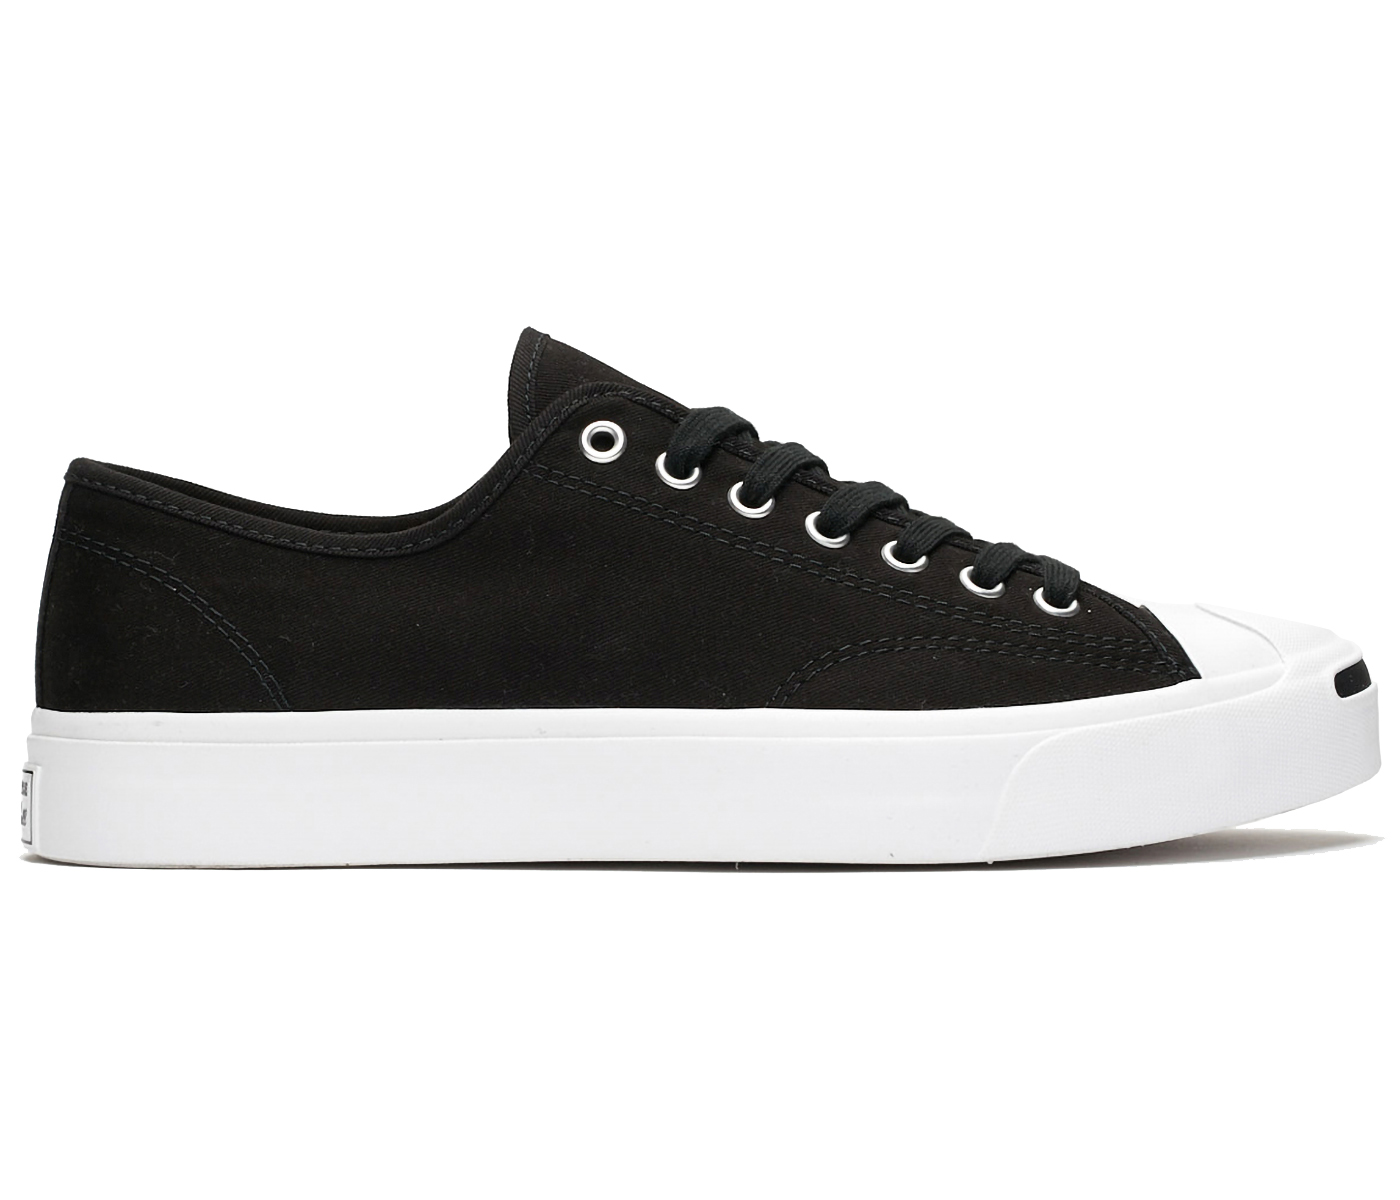 Converse Jack Purcell Canvas Low Black - 164056C - US